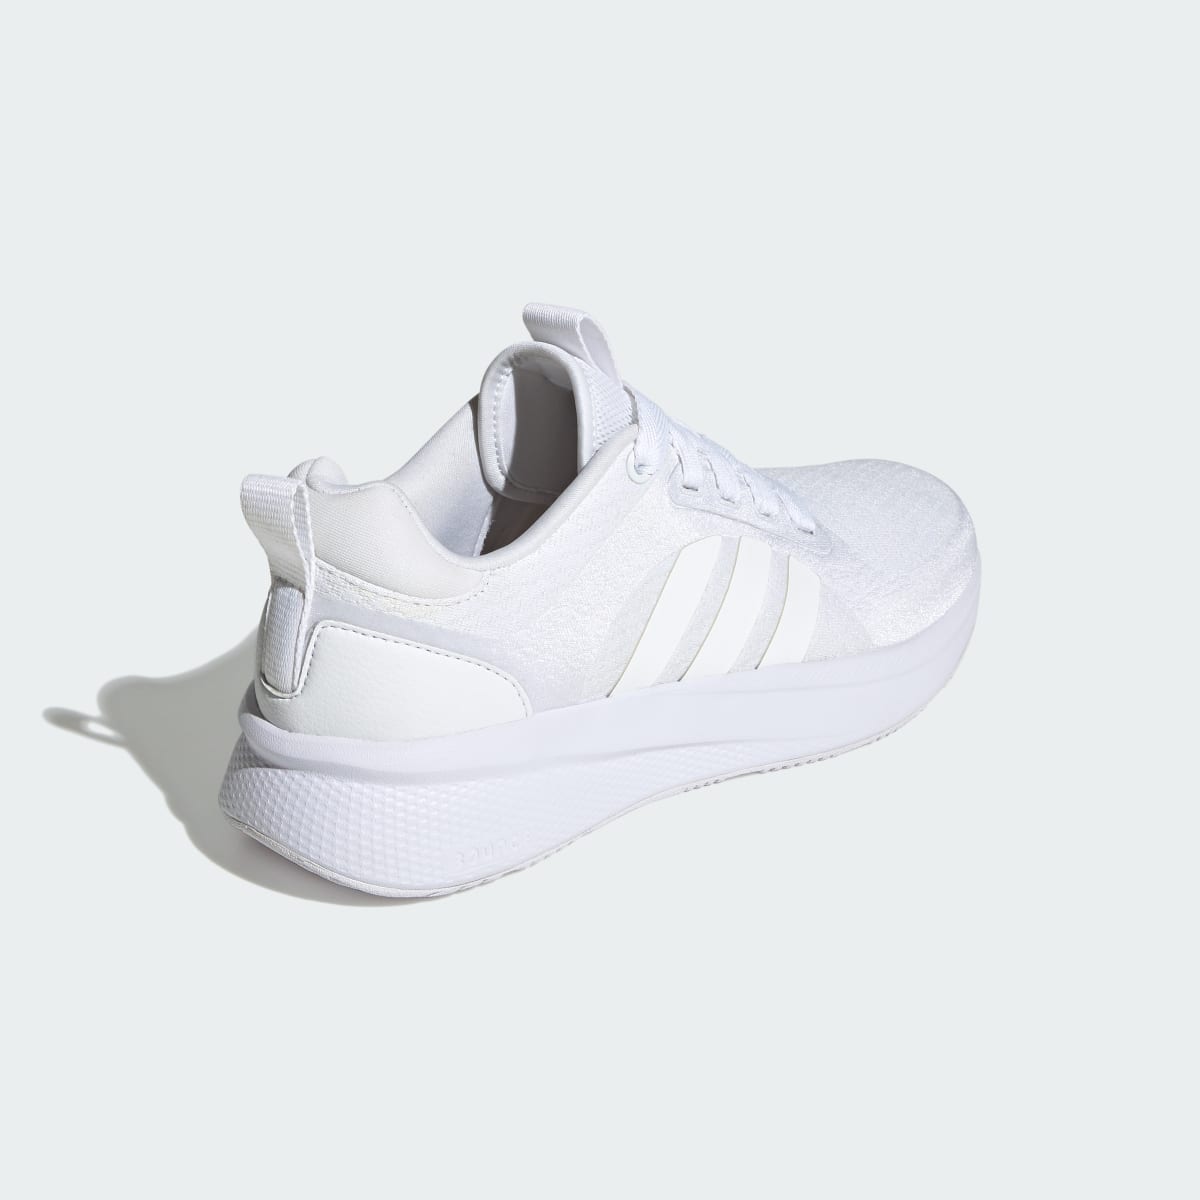 Adidas Edge Lux 6.0 Shoes. 6